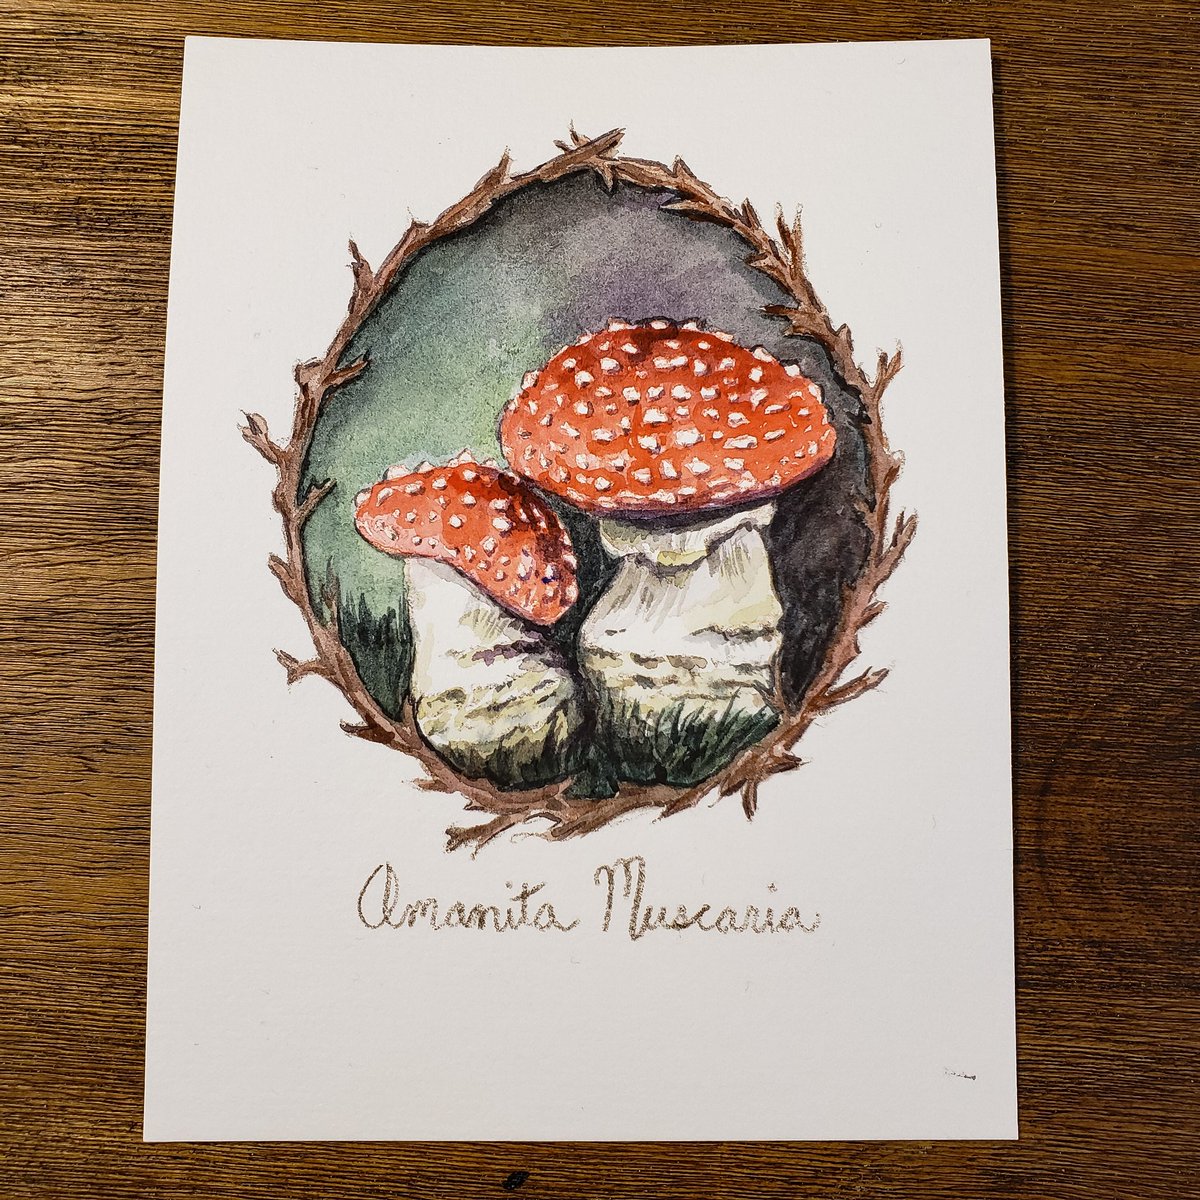 Here is #mayshroom day 4, today's prompt was the Amanita Muscaria also known as the Fly Agaric.
.
#earthmagic #fungi #fungus #watercolorartist #watercolor #mushrooms #mushroom #forager #mushroomsociety  #mycology #mycologysociety #redmushroom #amantiamuscaria #flyagaric #amantia